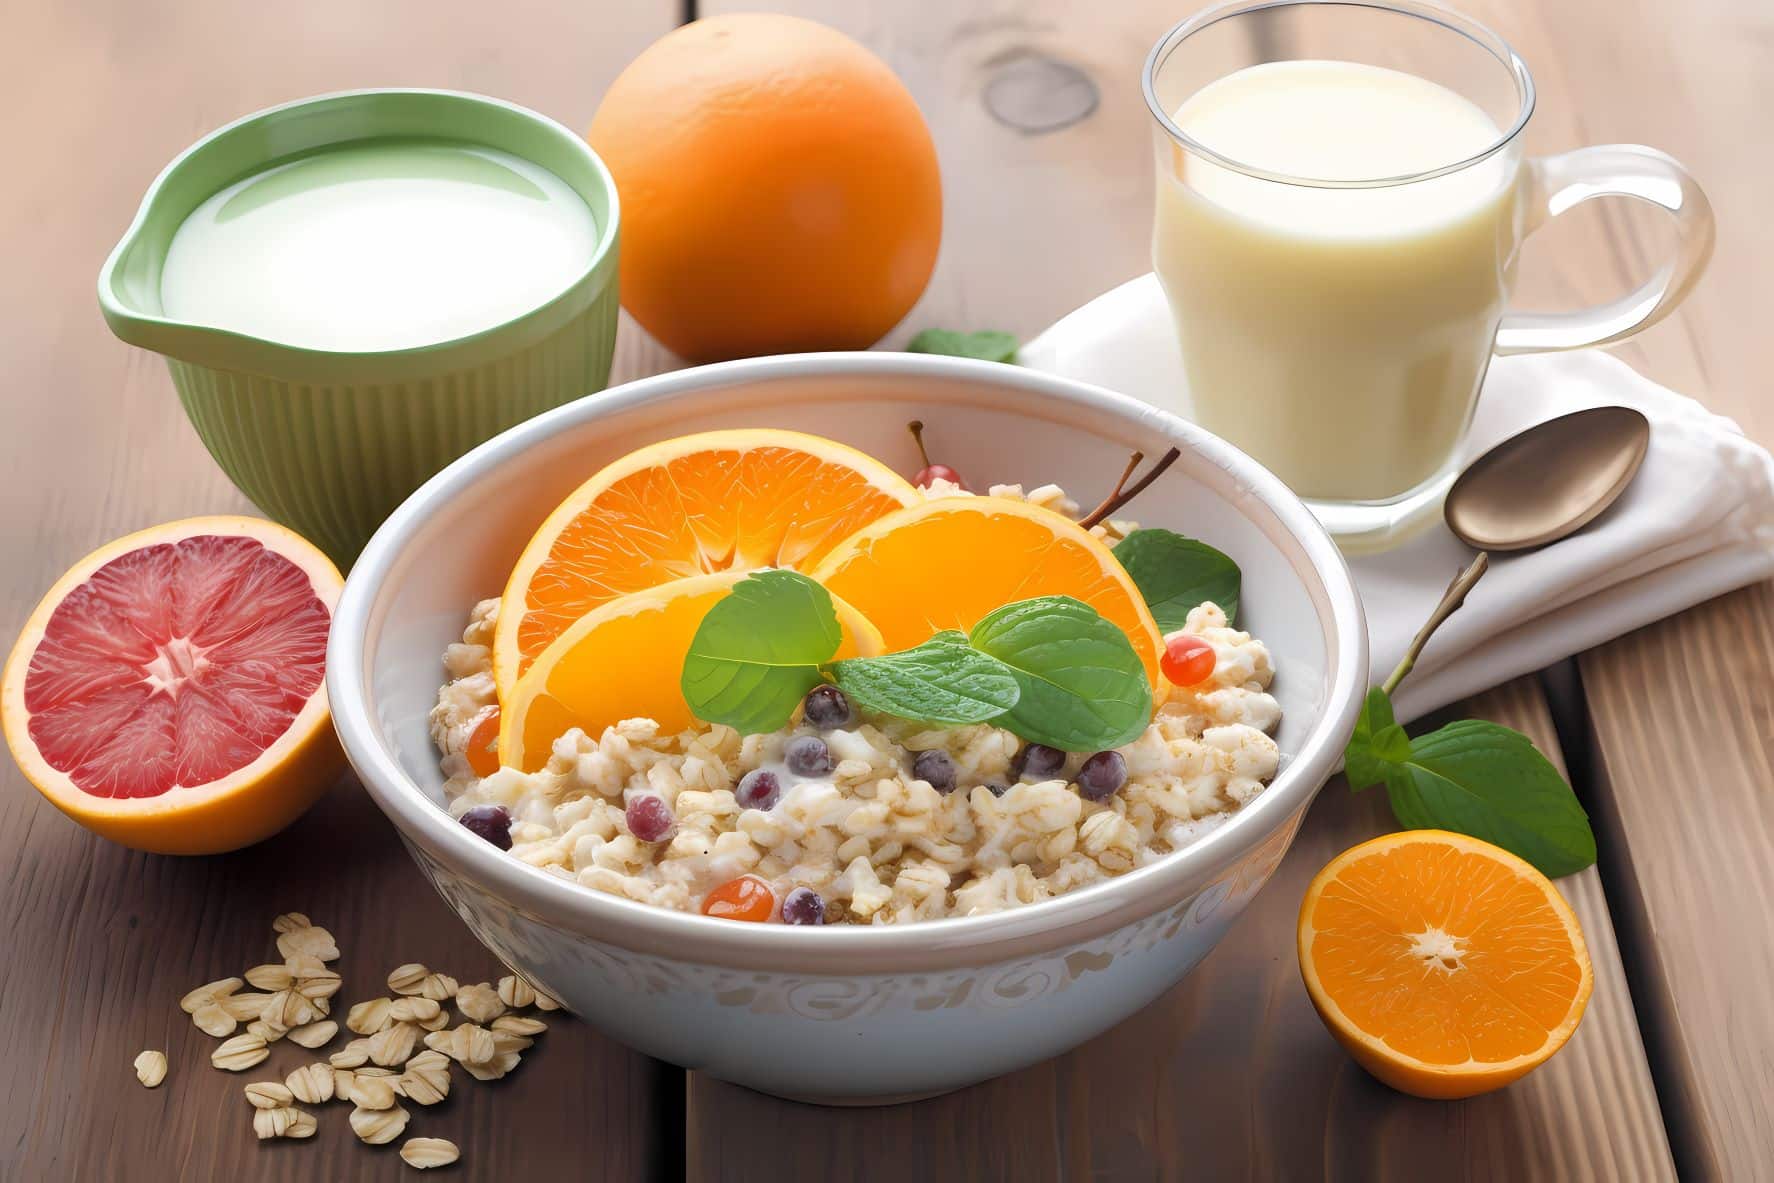 Foods And Vitamins To Energize: Fueling Performance Daily